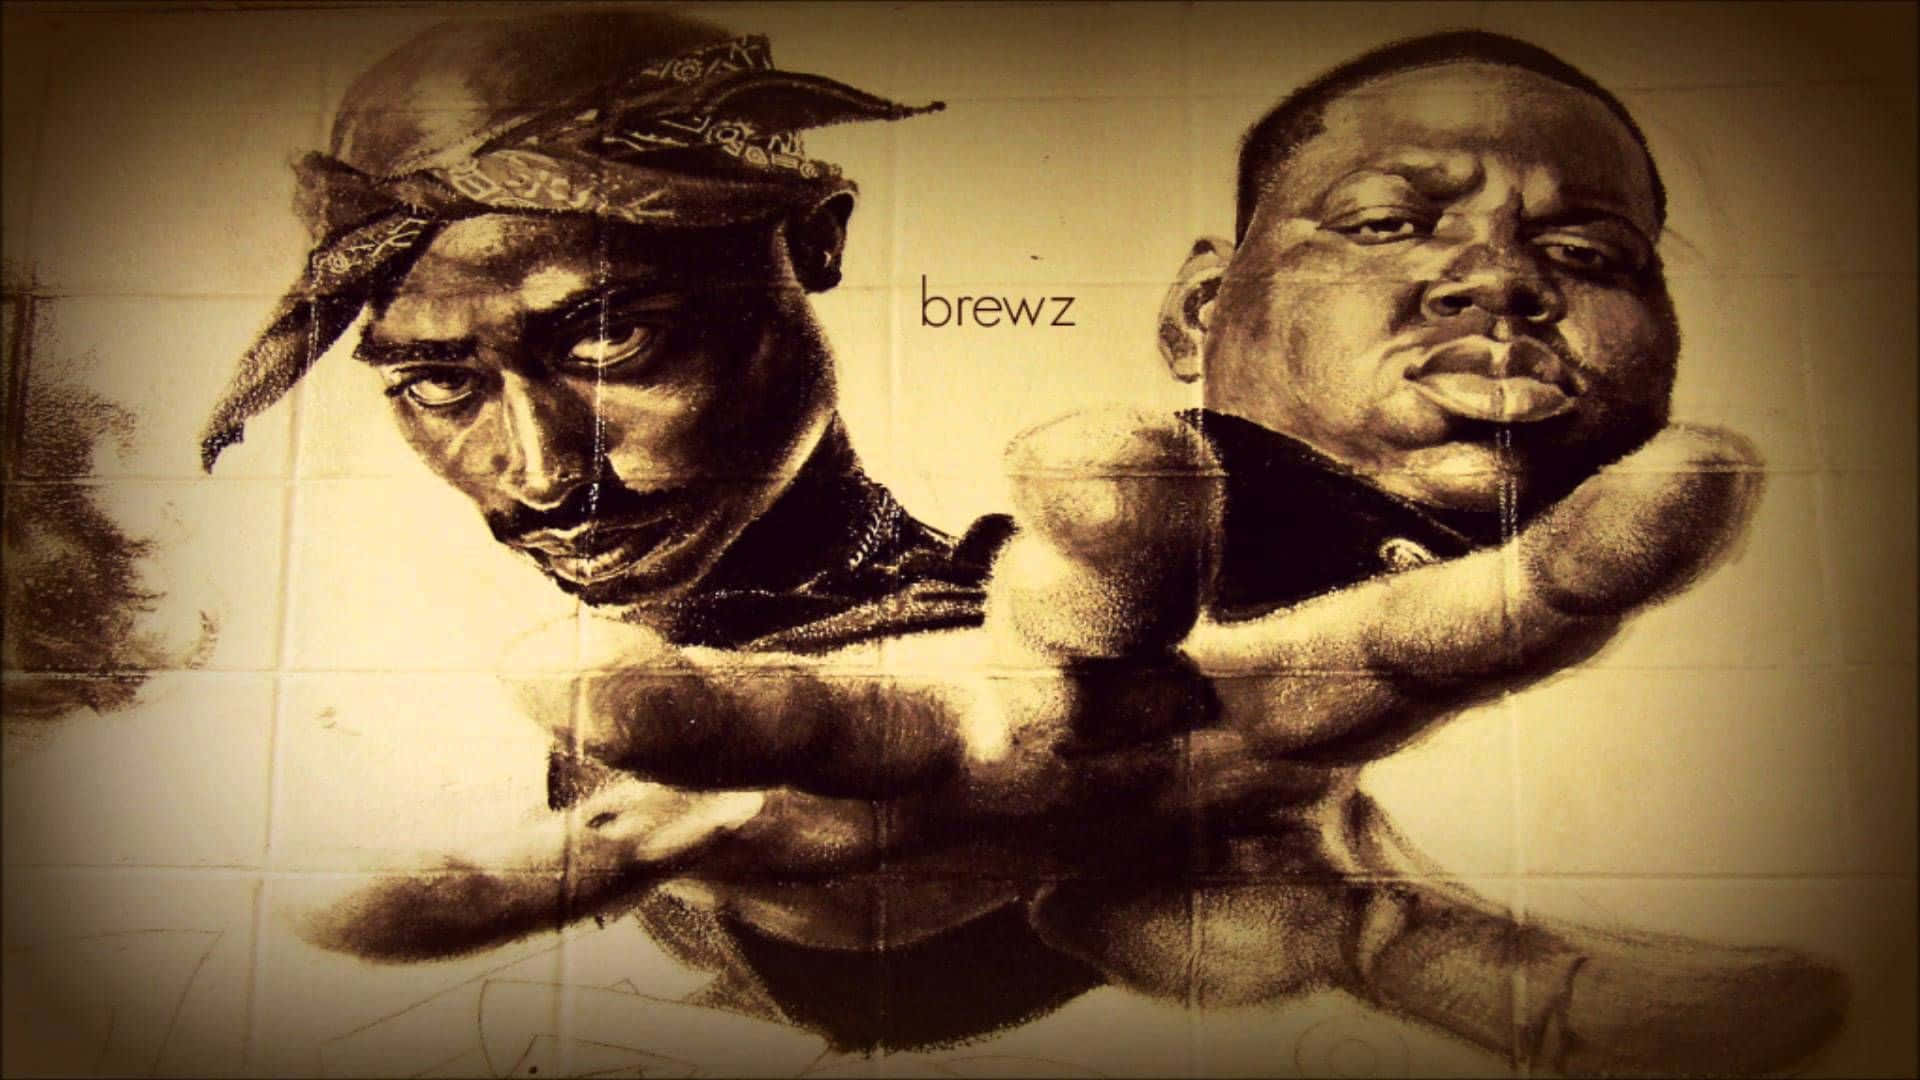 A snapshot of two pioneering hip-hop stars, Tupac Shakur (2Pac) and The Notorious B.I.G. Wallpaper